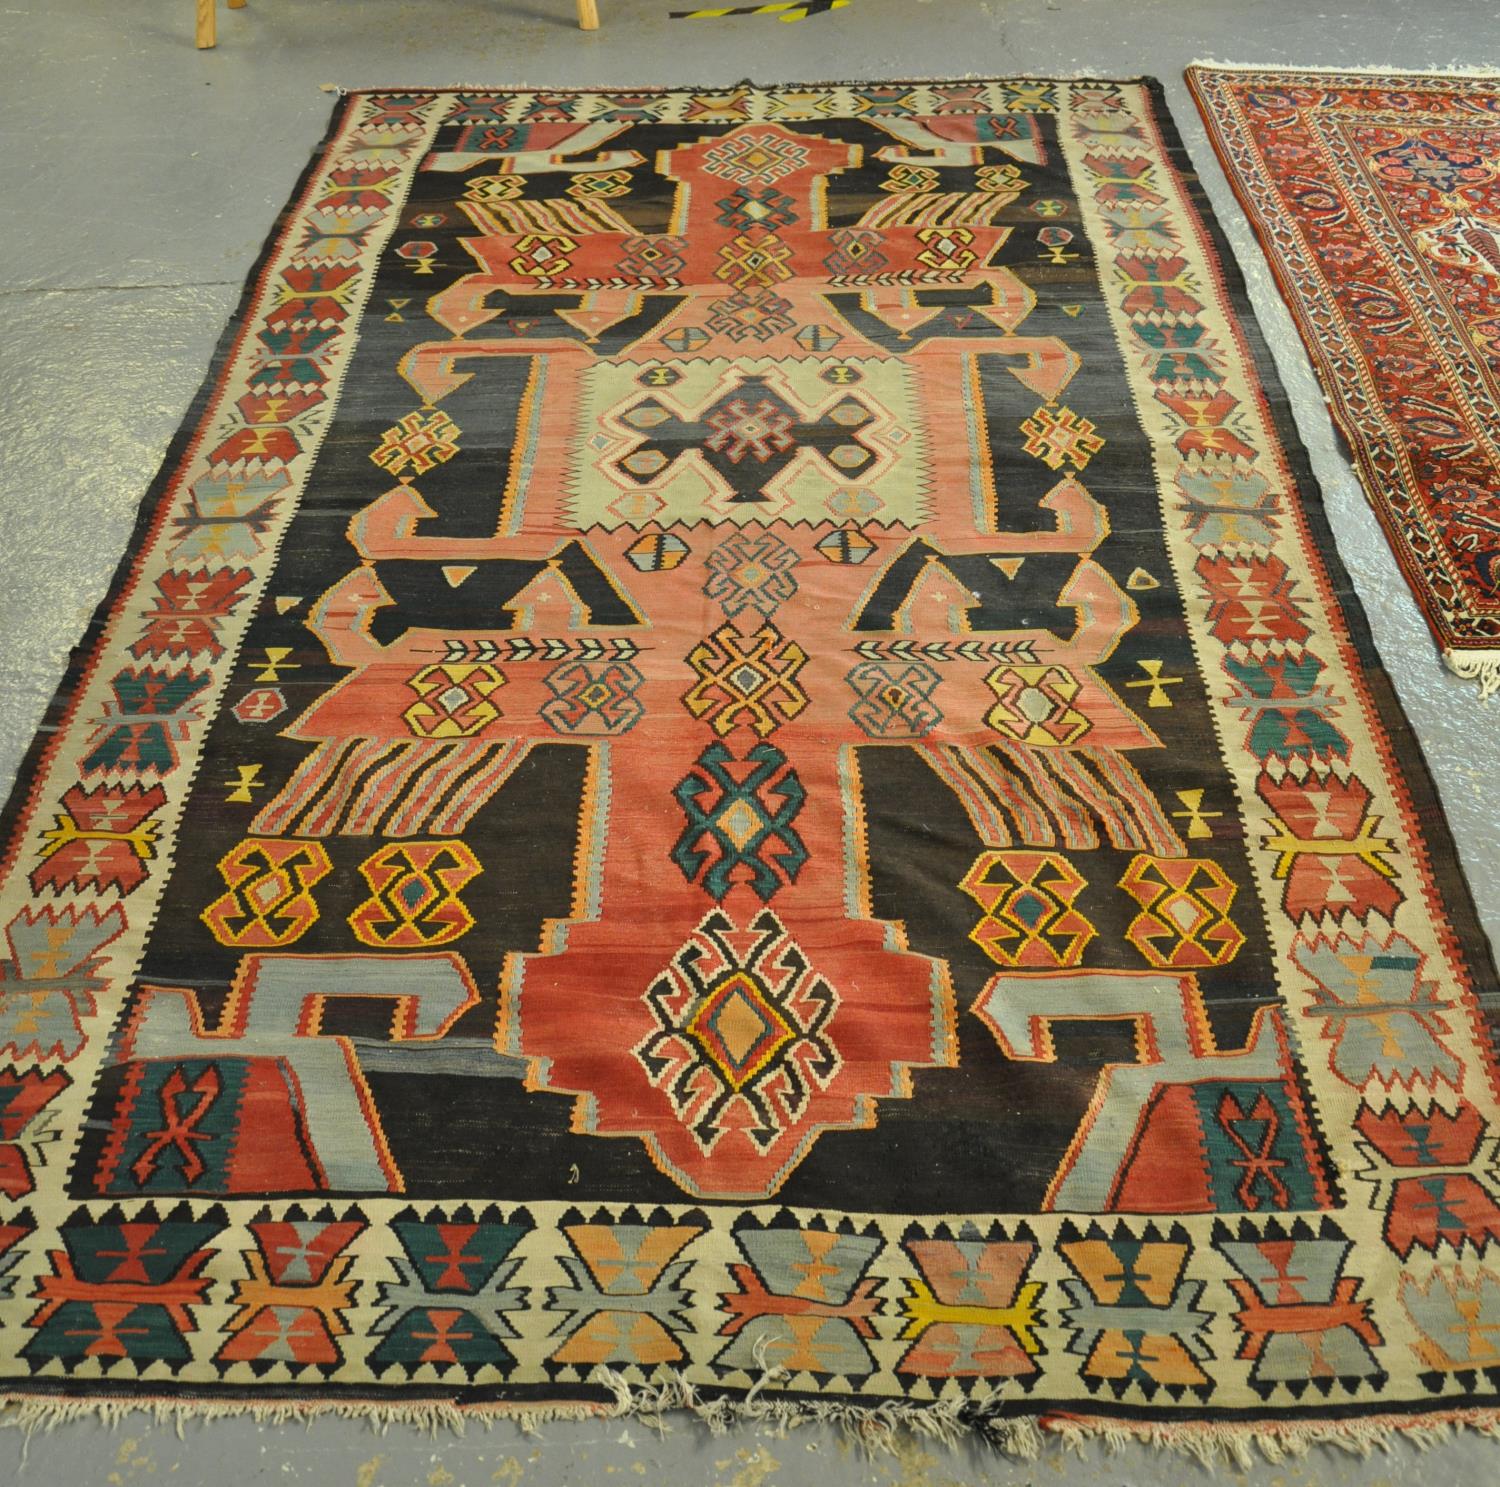 Middle Eastern long Kelim runner, overall with geometric decoration of tarantula and other